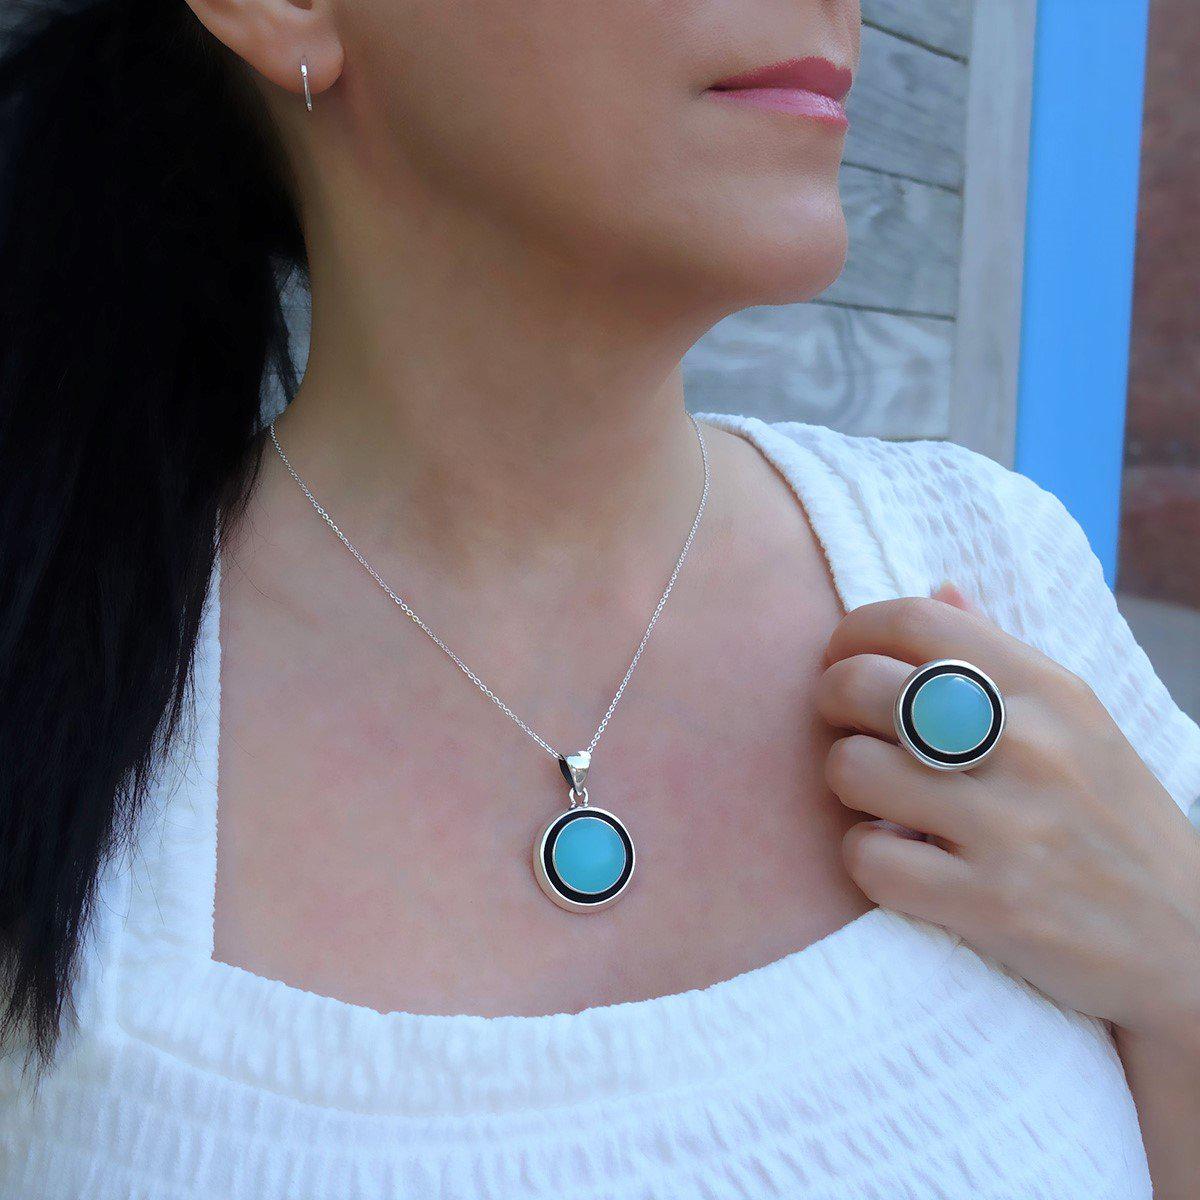 Blue Chalcedony Oval Pendant Necklace in Sterling Silver - Etsy